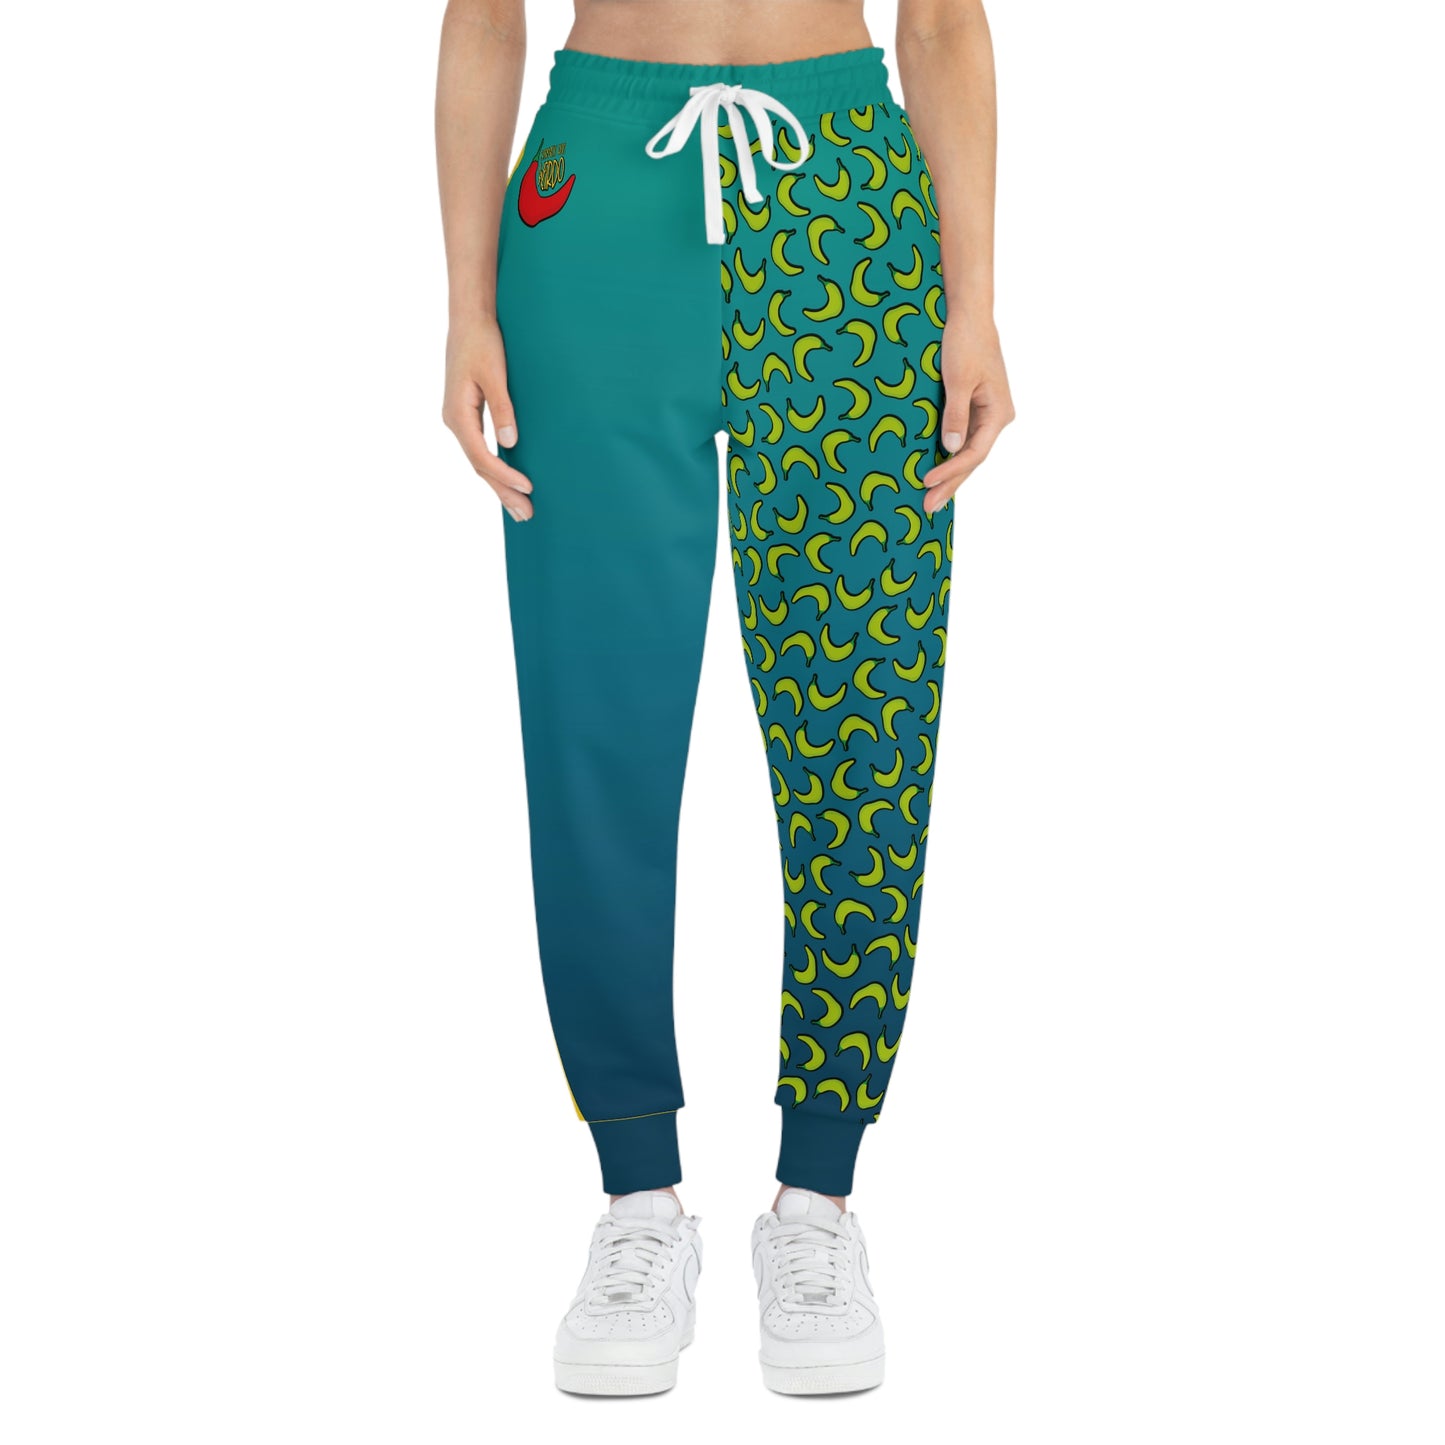 Weirdo | Athletic joggers for women in bright colors. This jogging pants for women have one leg that is covered in hot spicy green peppers.